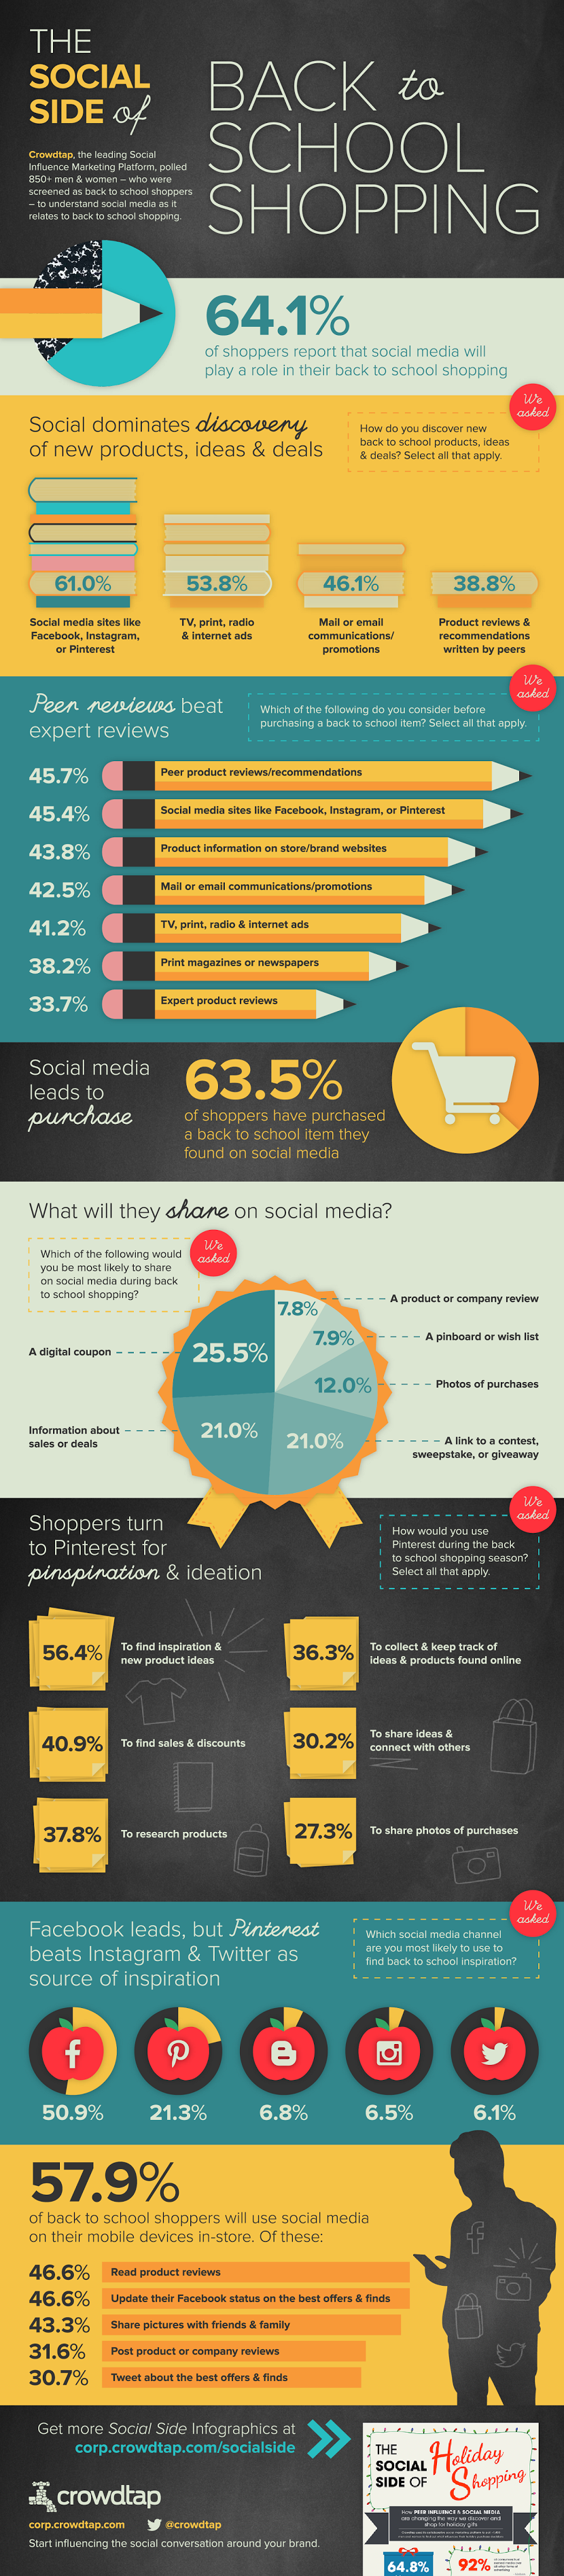 Social discovery prompts back to school product sales - #infographic